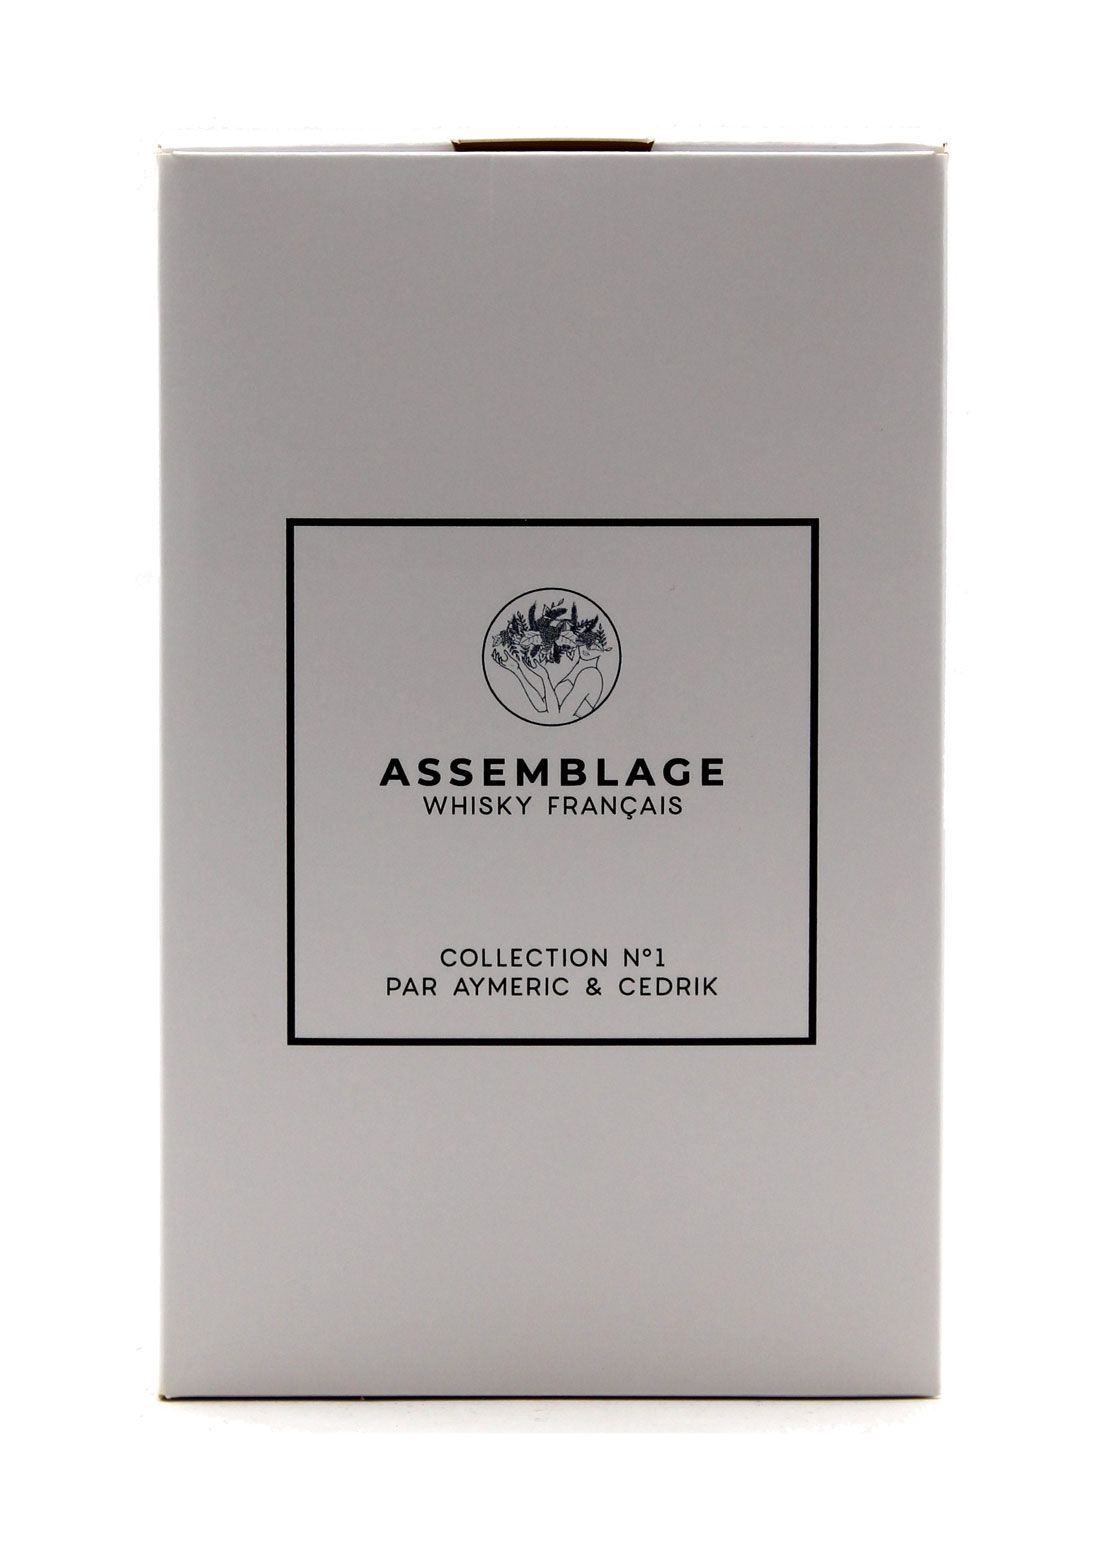 Whisky-Assemblage-1-C